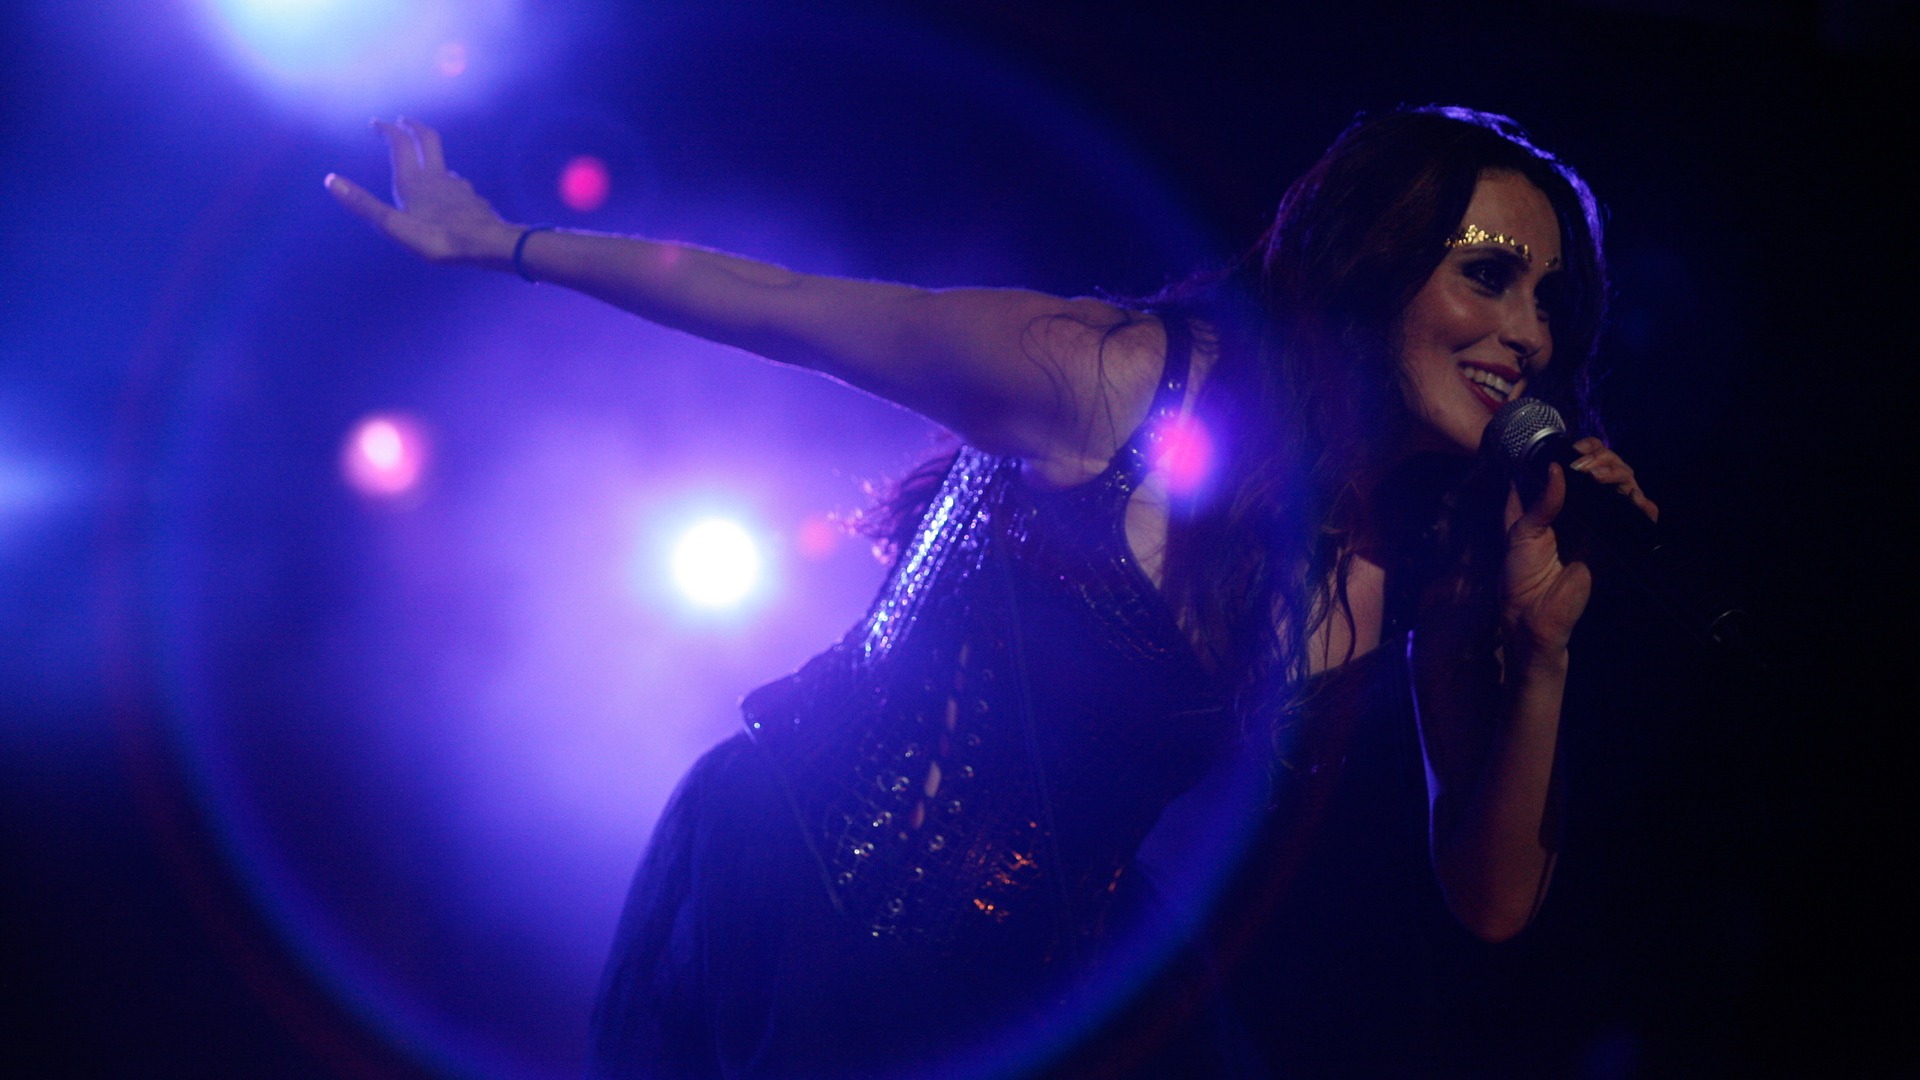 Sharon den Adel #013 - 1920x1080 Wallpapers Pictures Photos Images